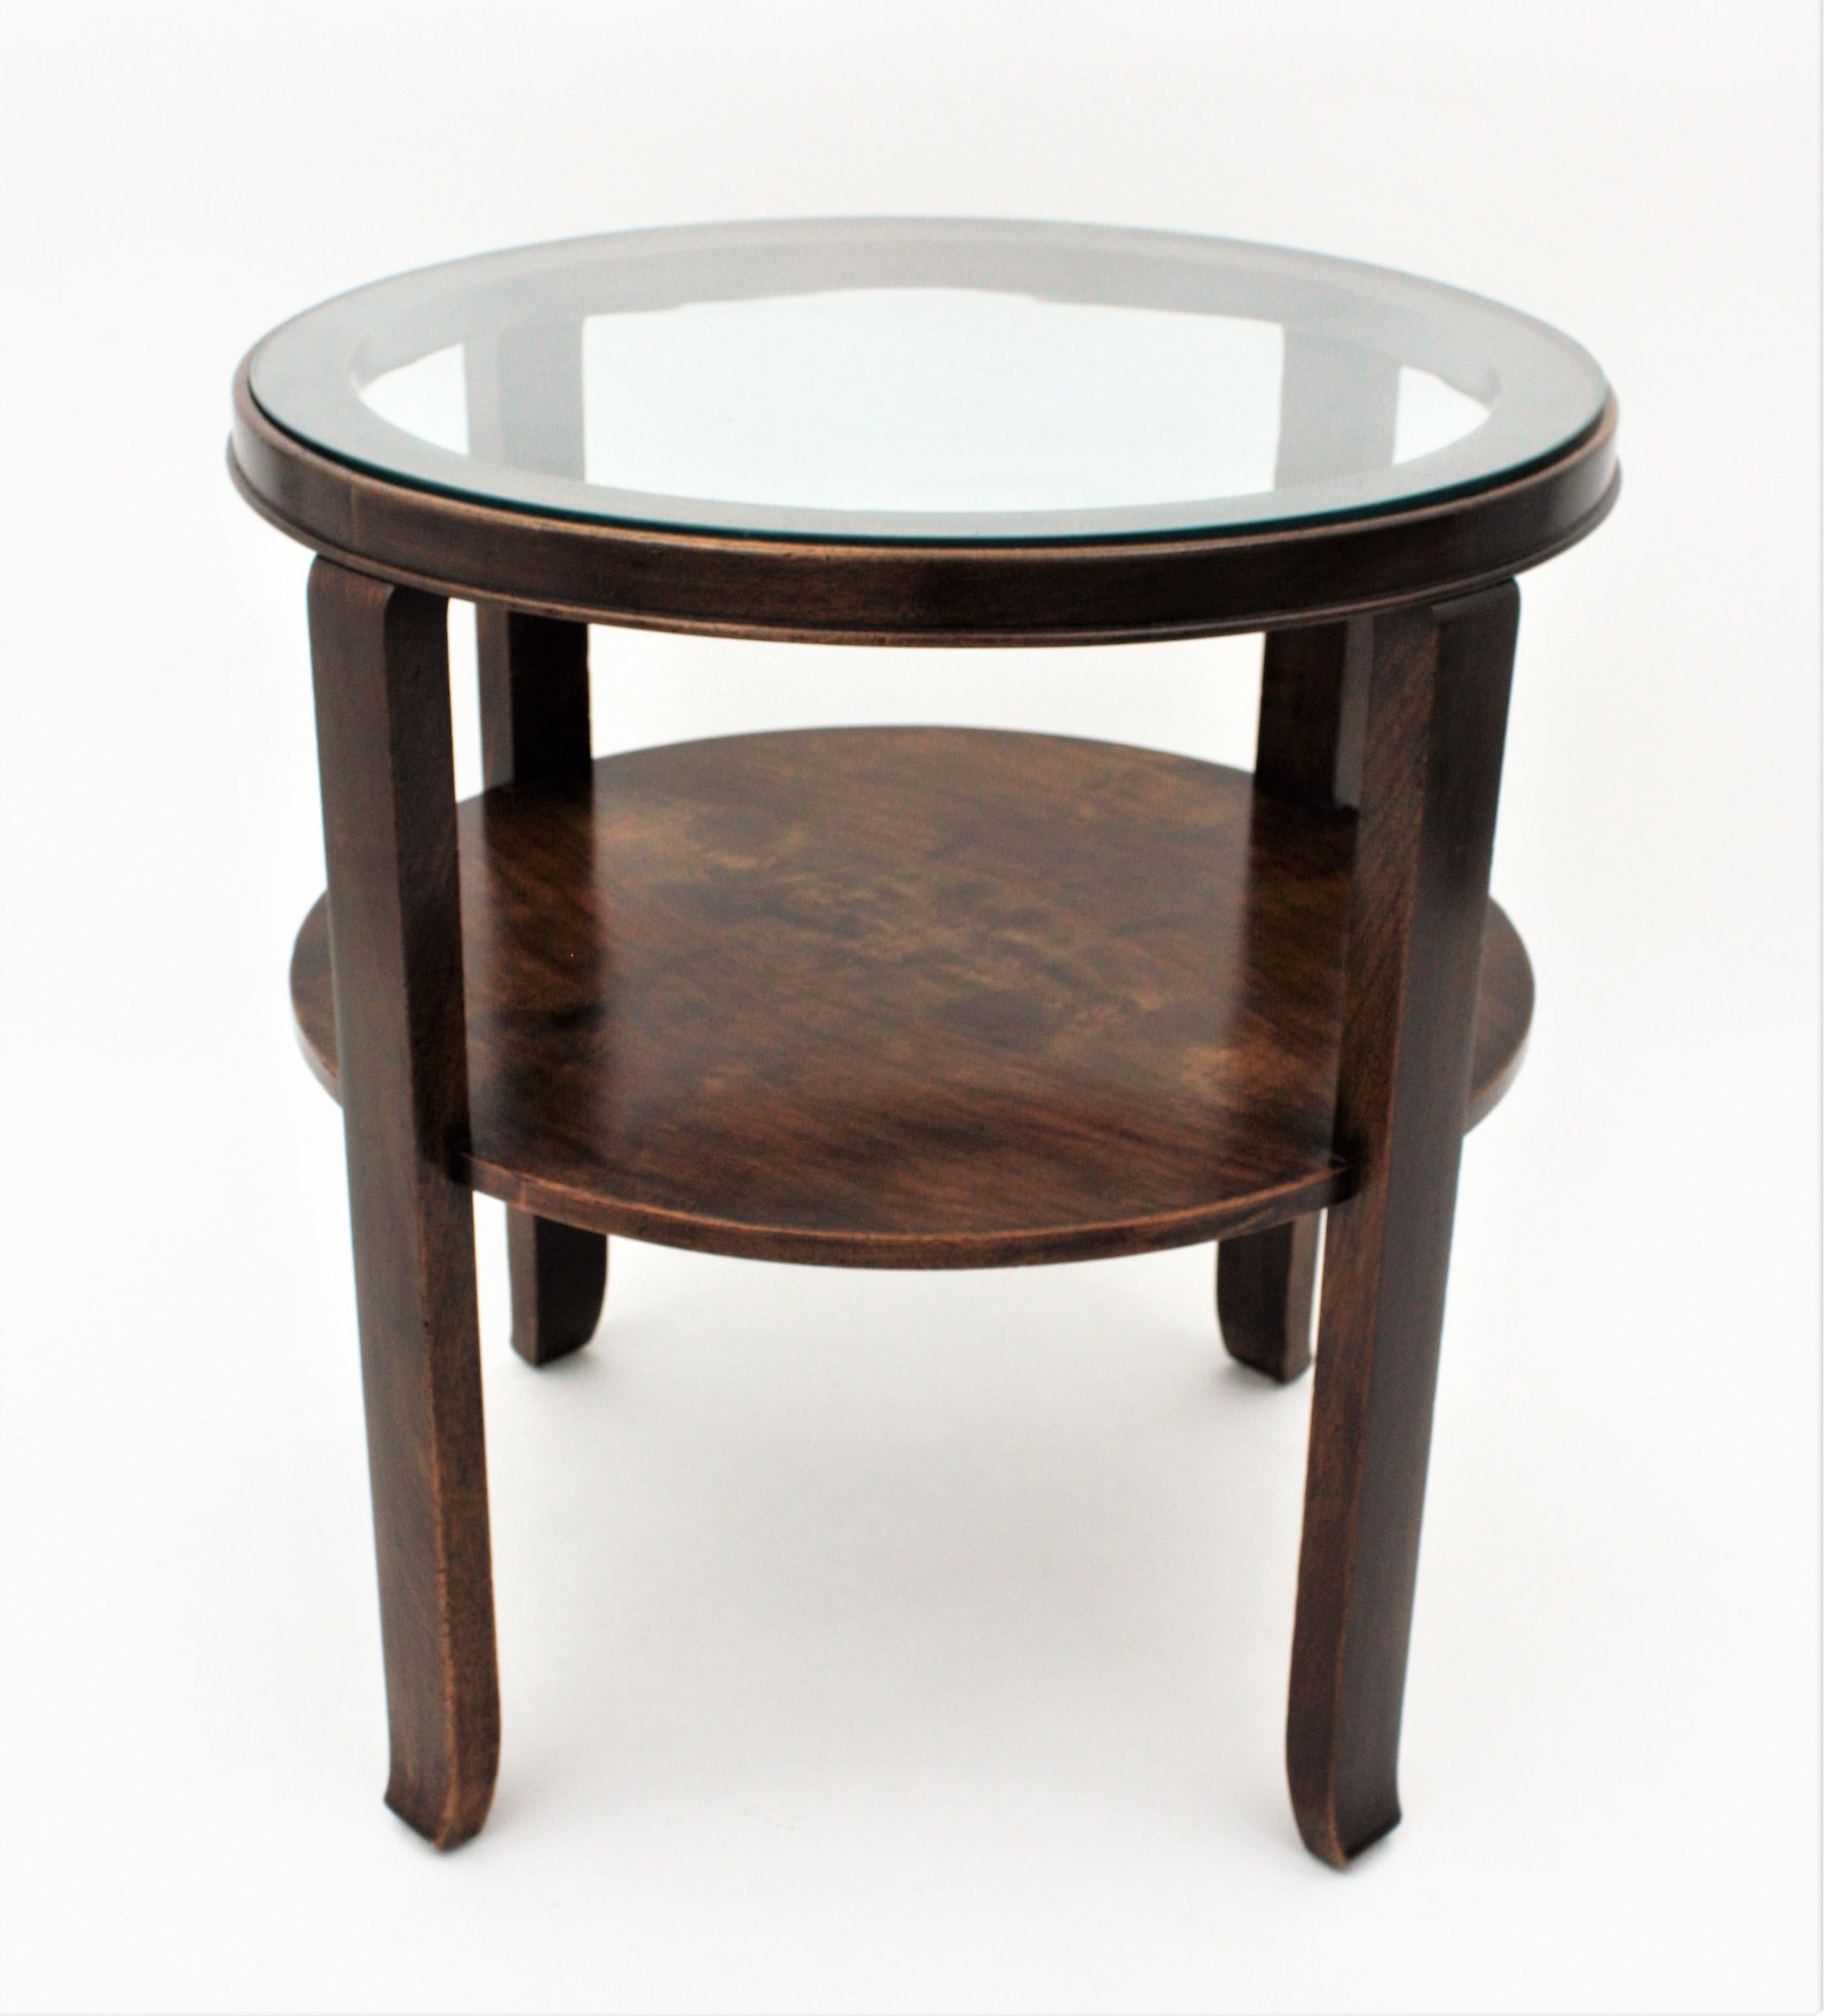 French Art Deco Two Level Coffee Table / Side Table in Walnut For Sale 1